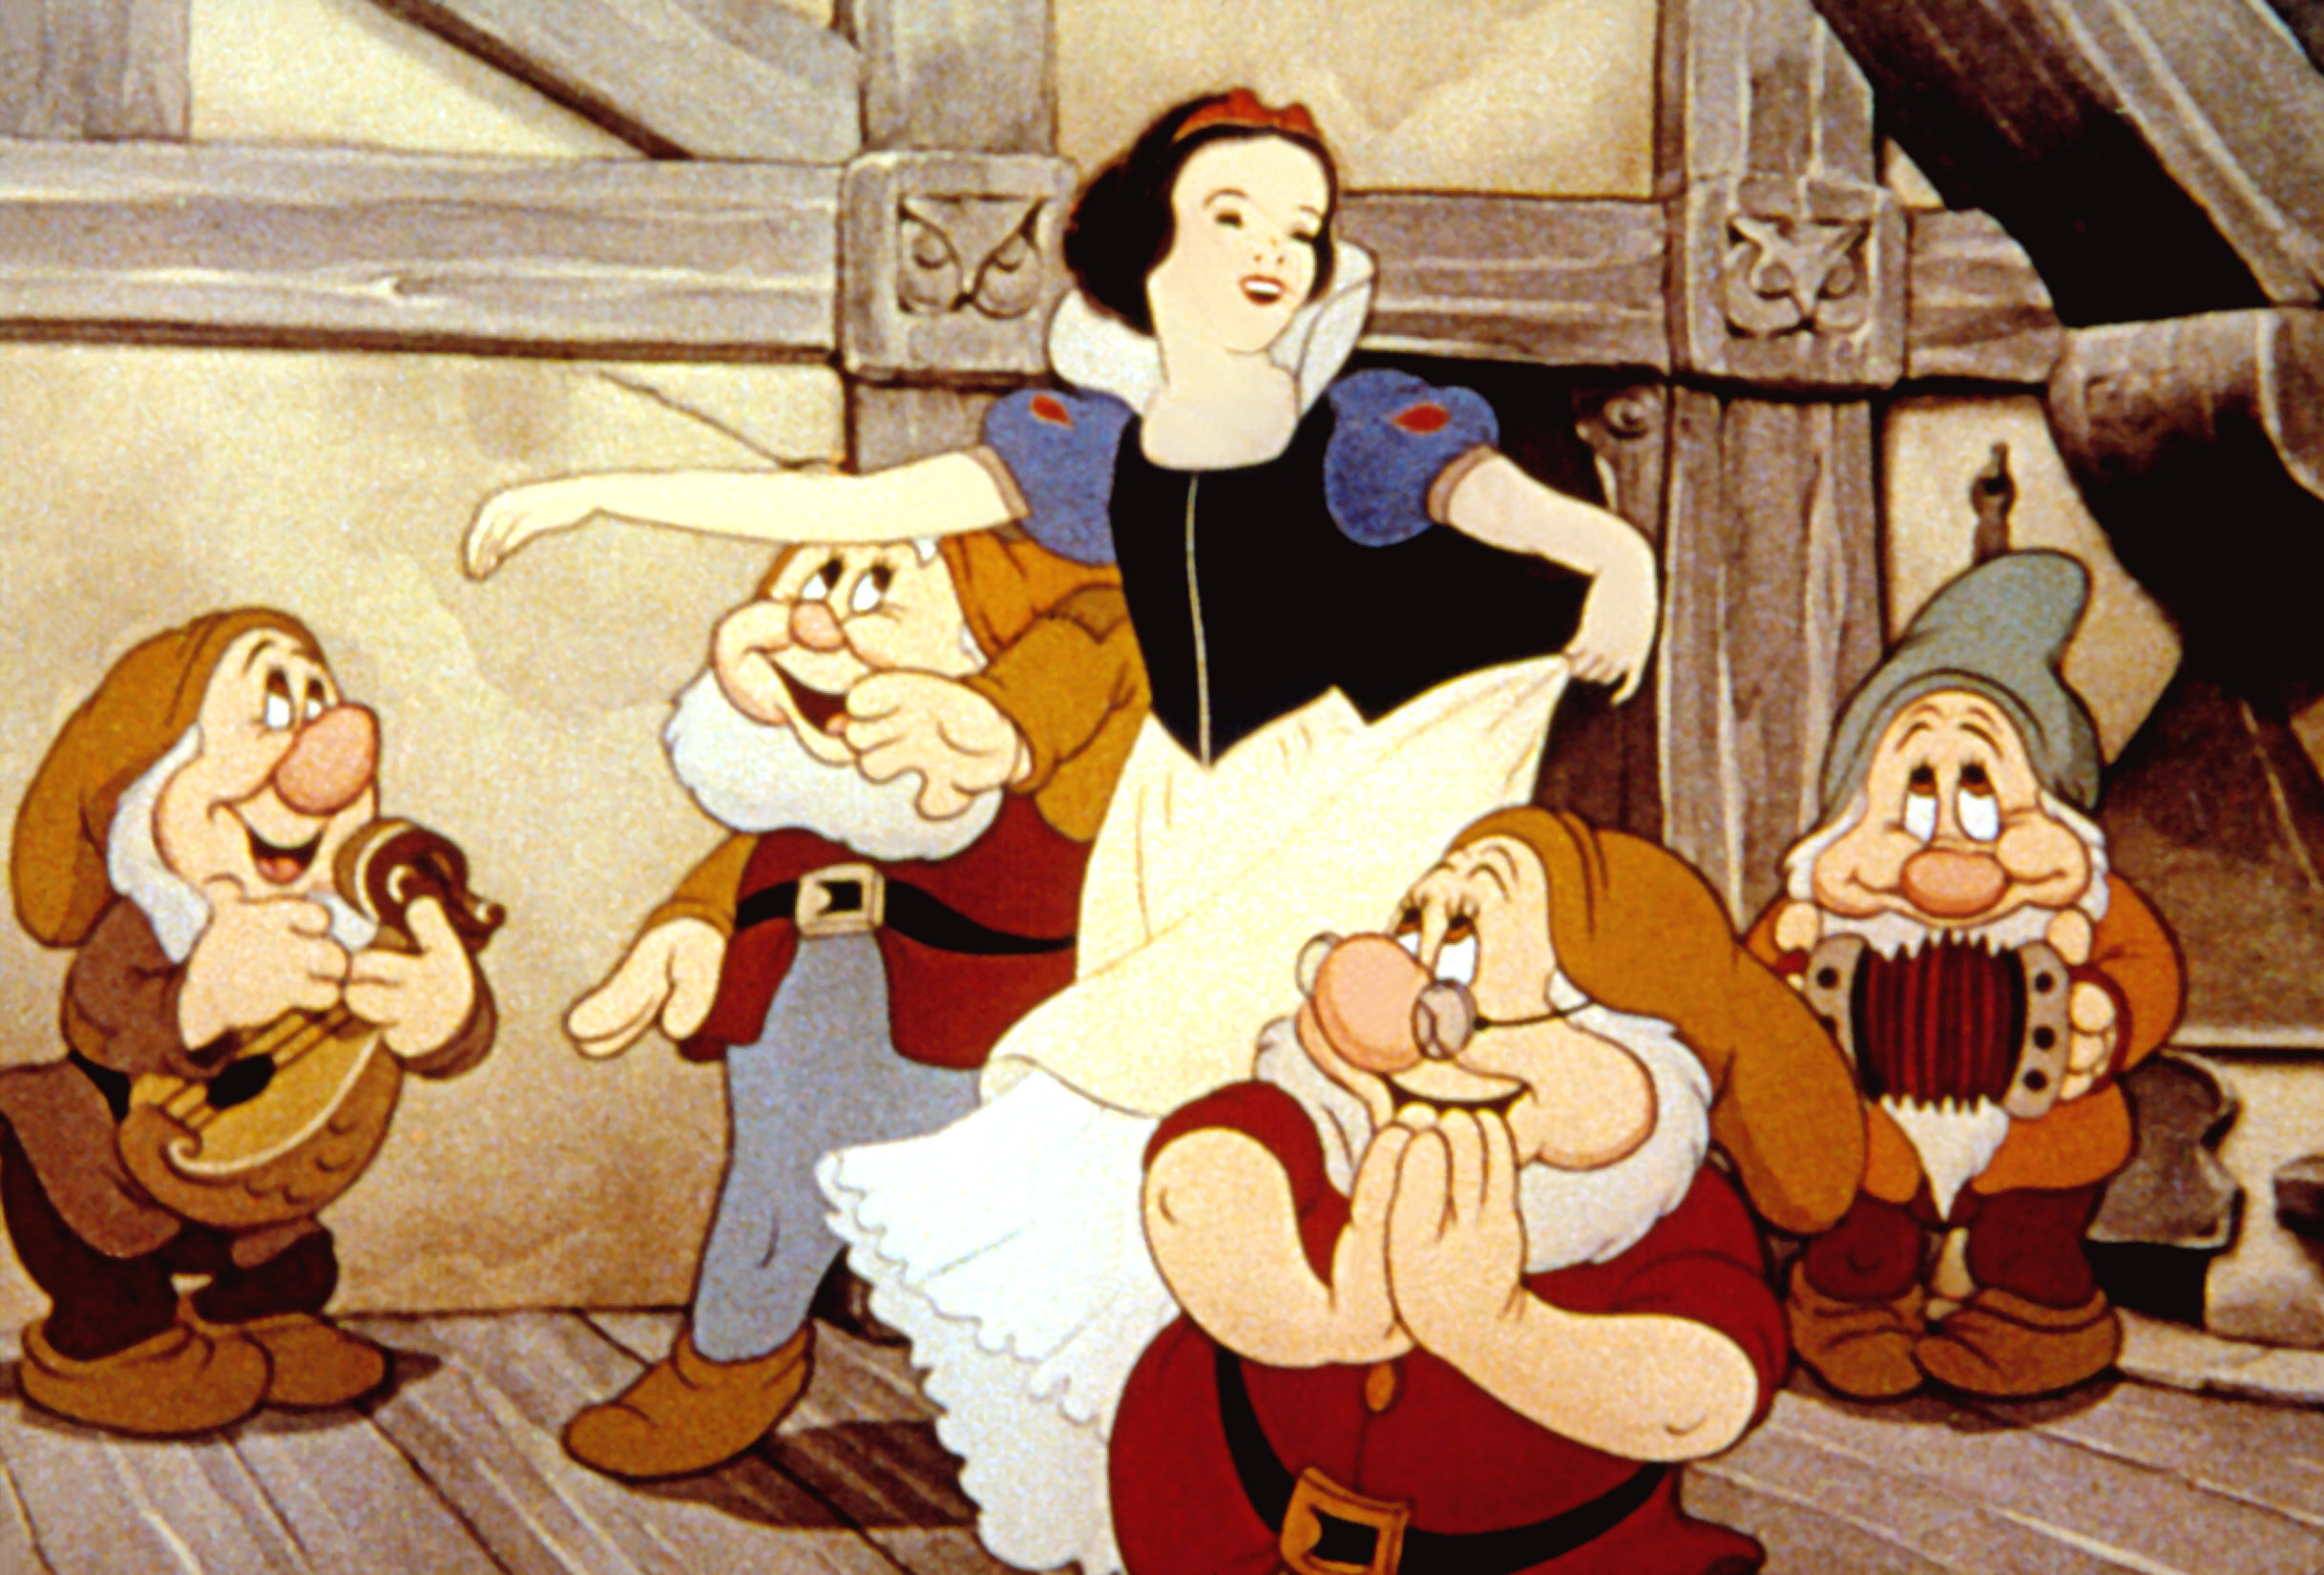 Snow White and four of the dwarfs dancing